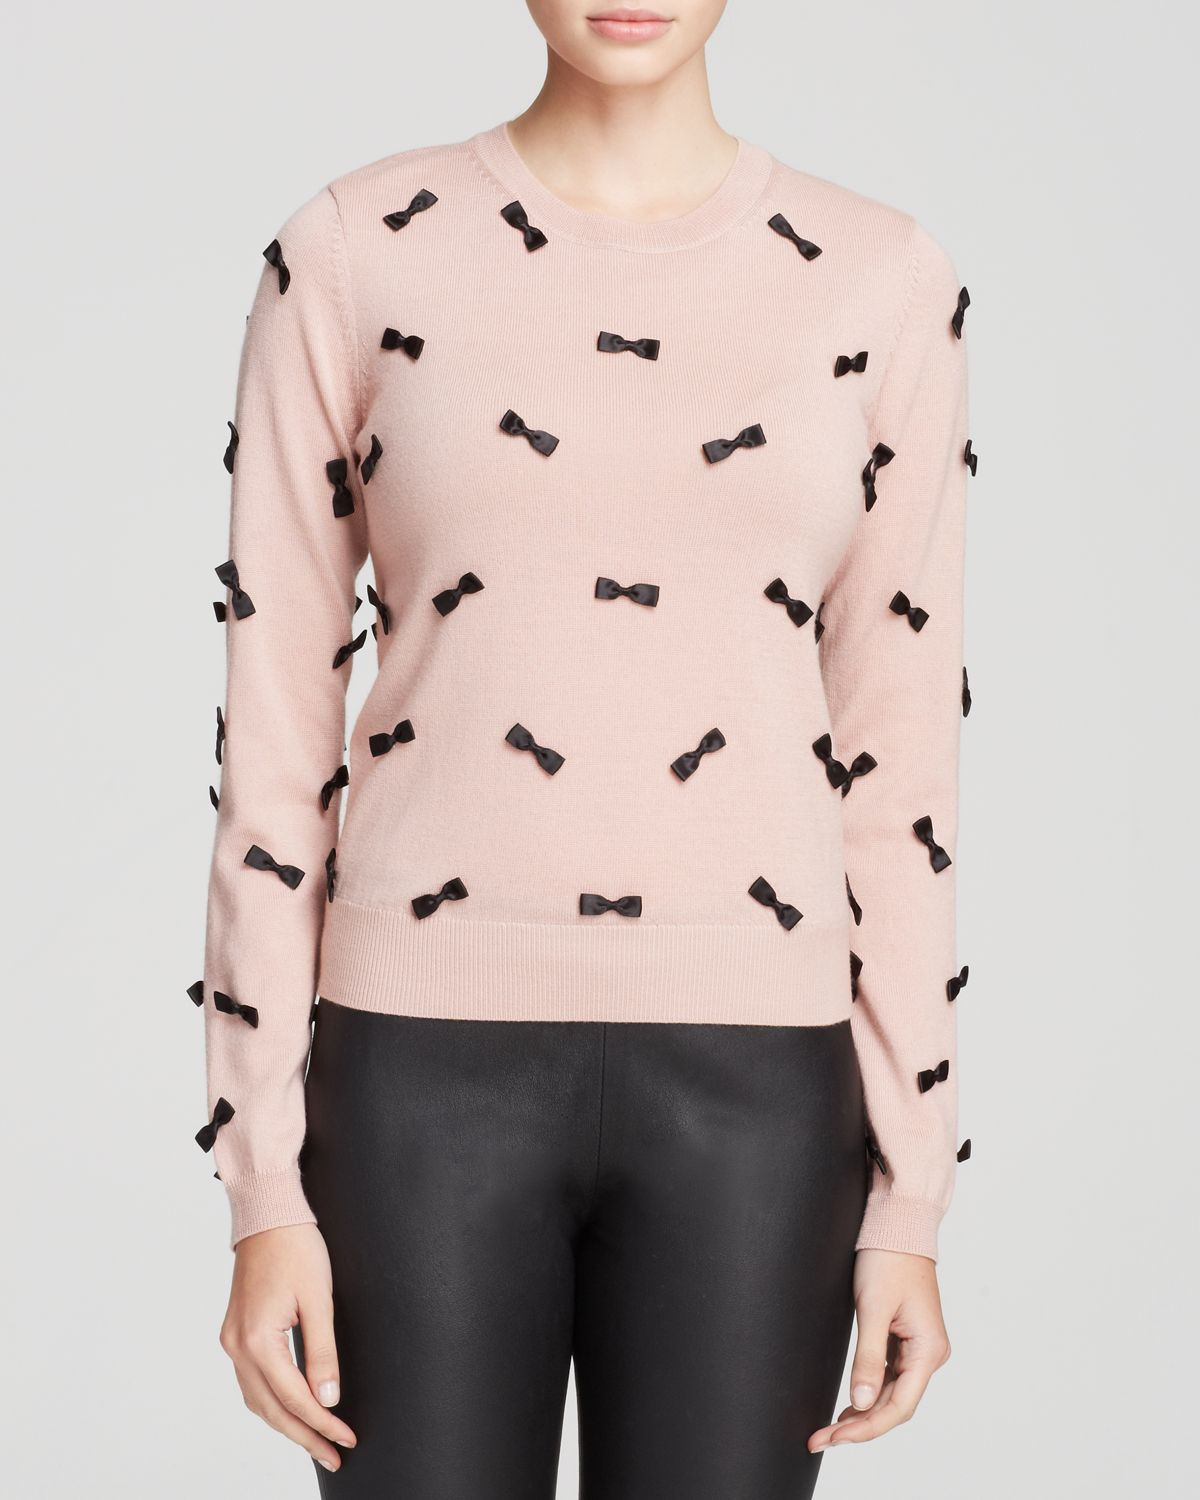 Lyst - Alice + Olivia Sweater - Allover Bow in Pink